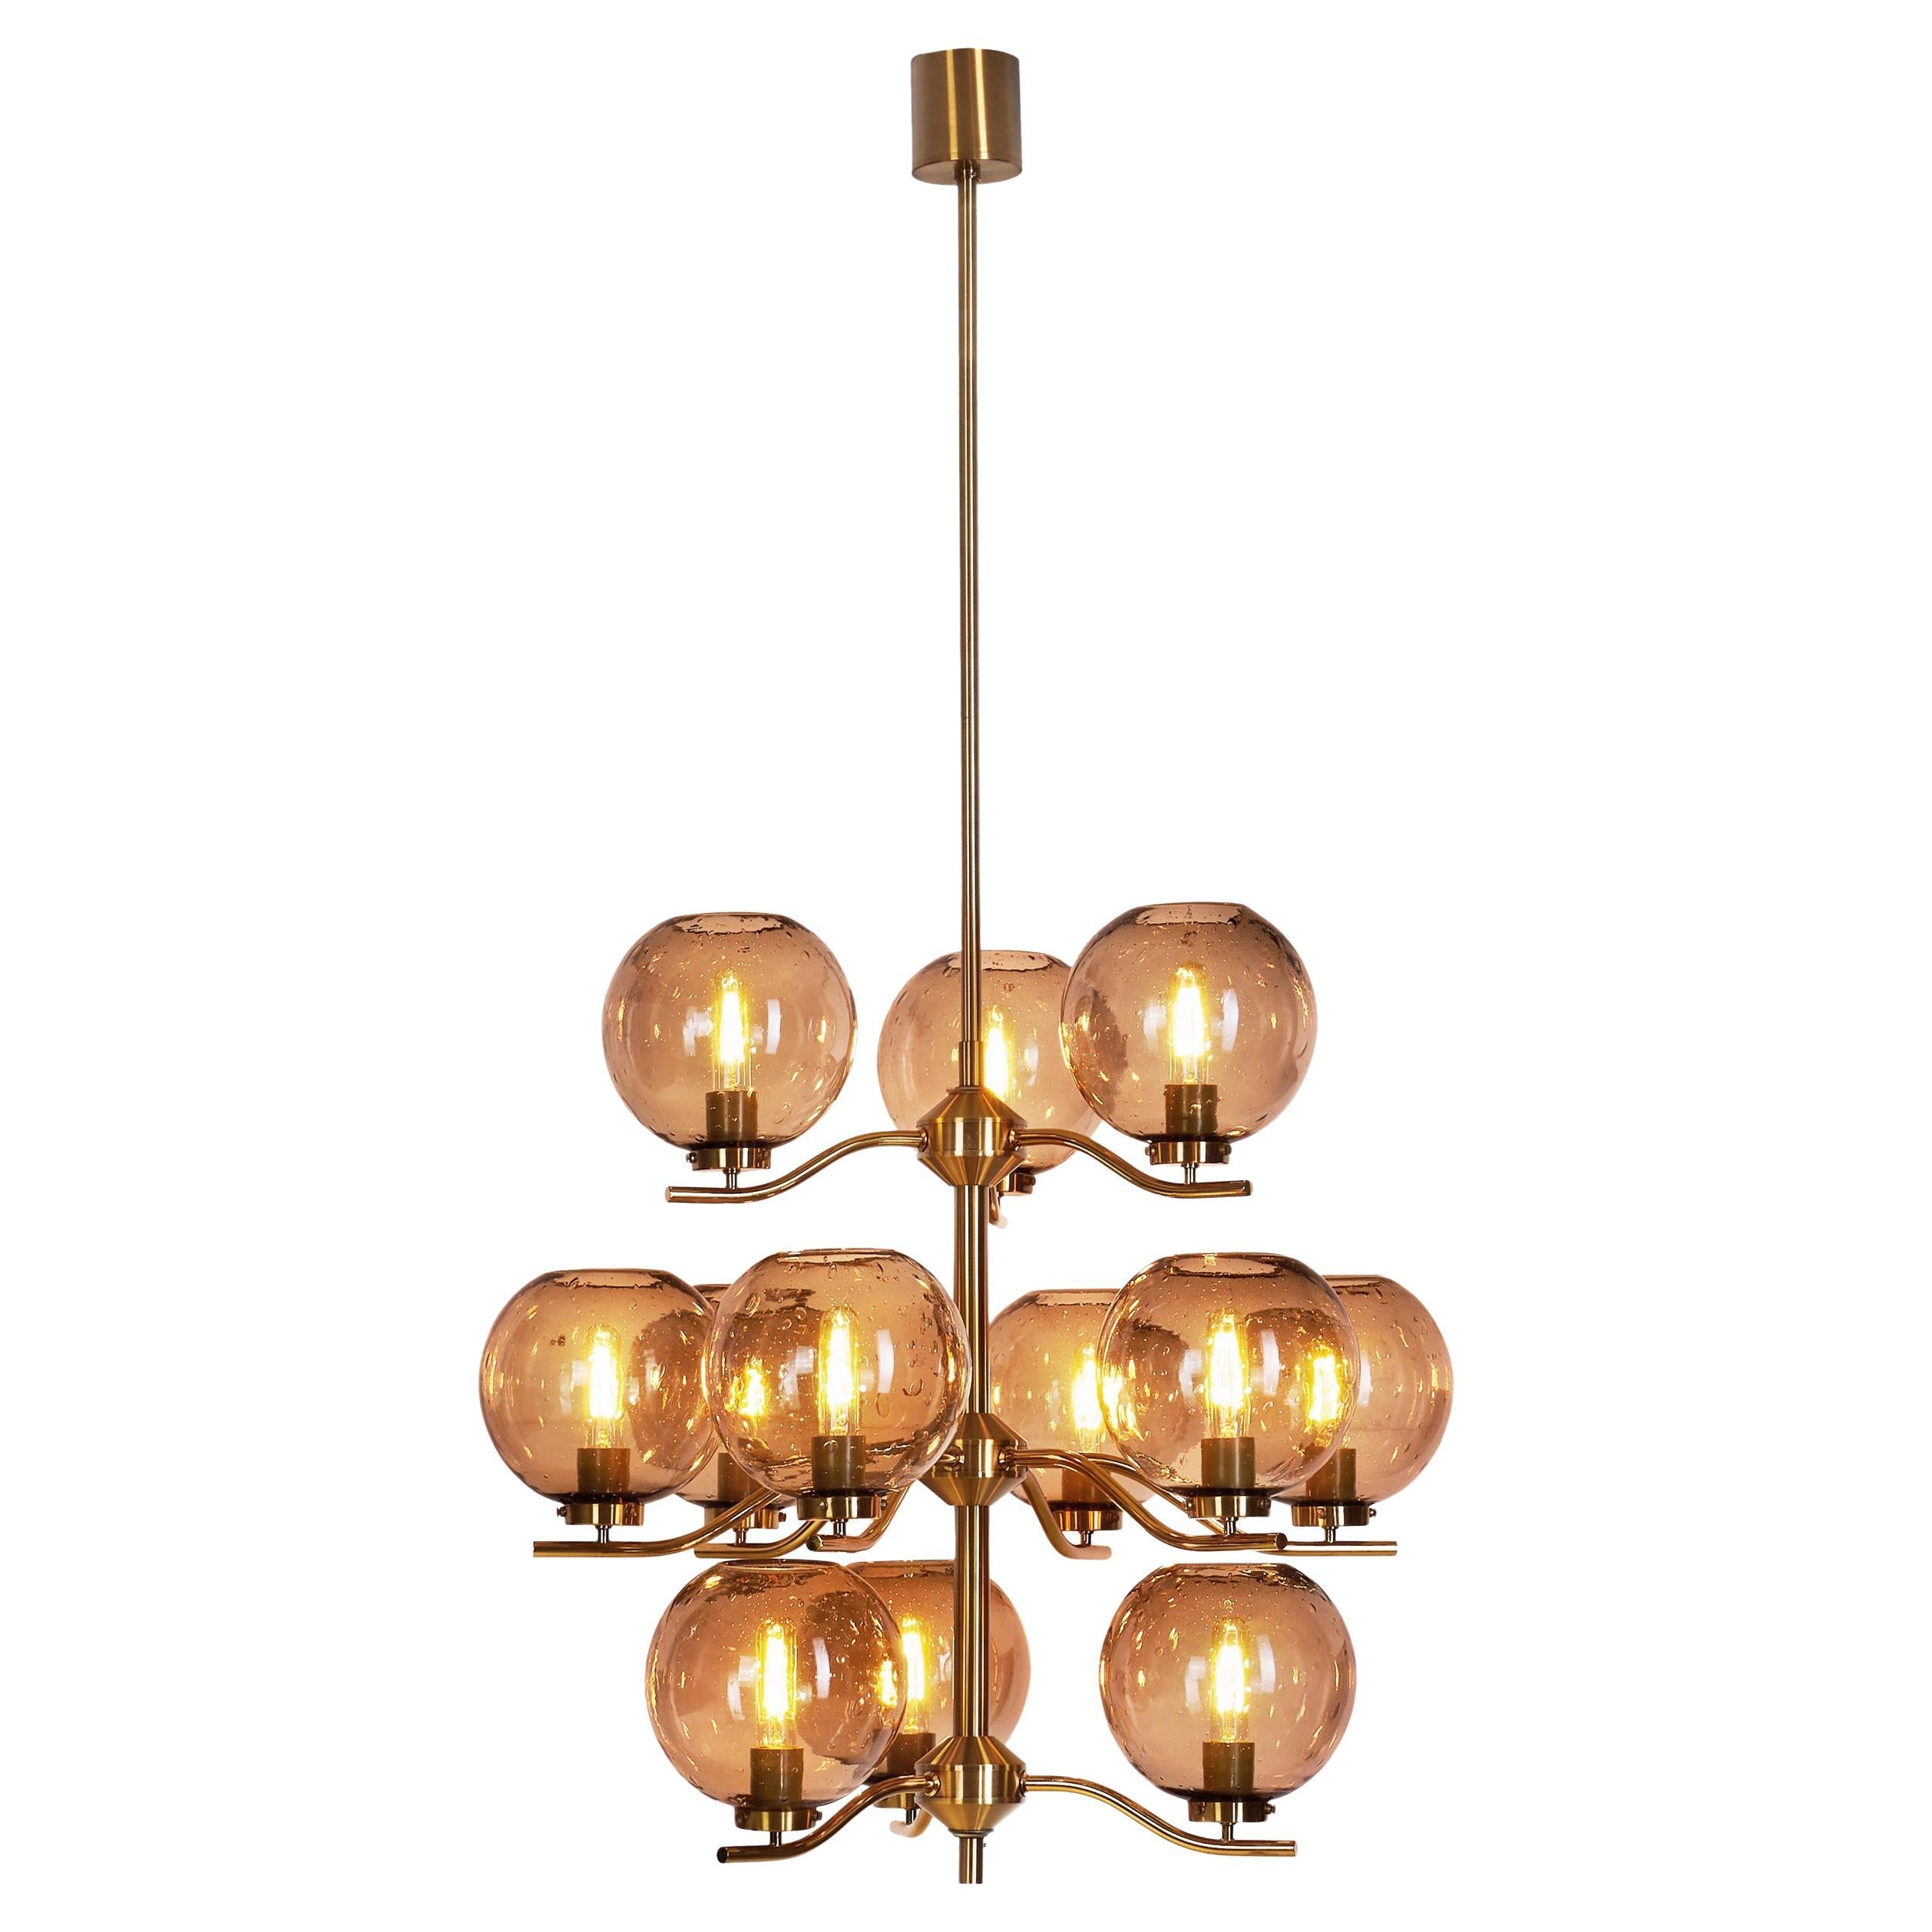 Holger Johansson Brass Chandelier with 12 Smoked Glass Shades, Sweden 1970s